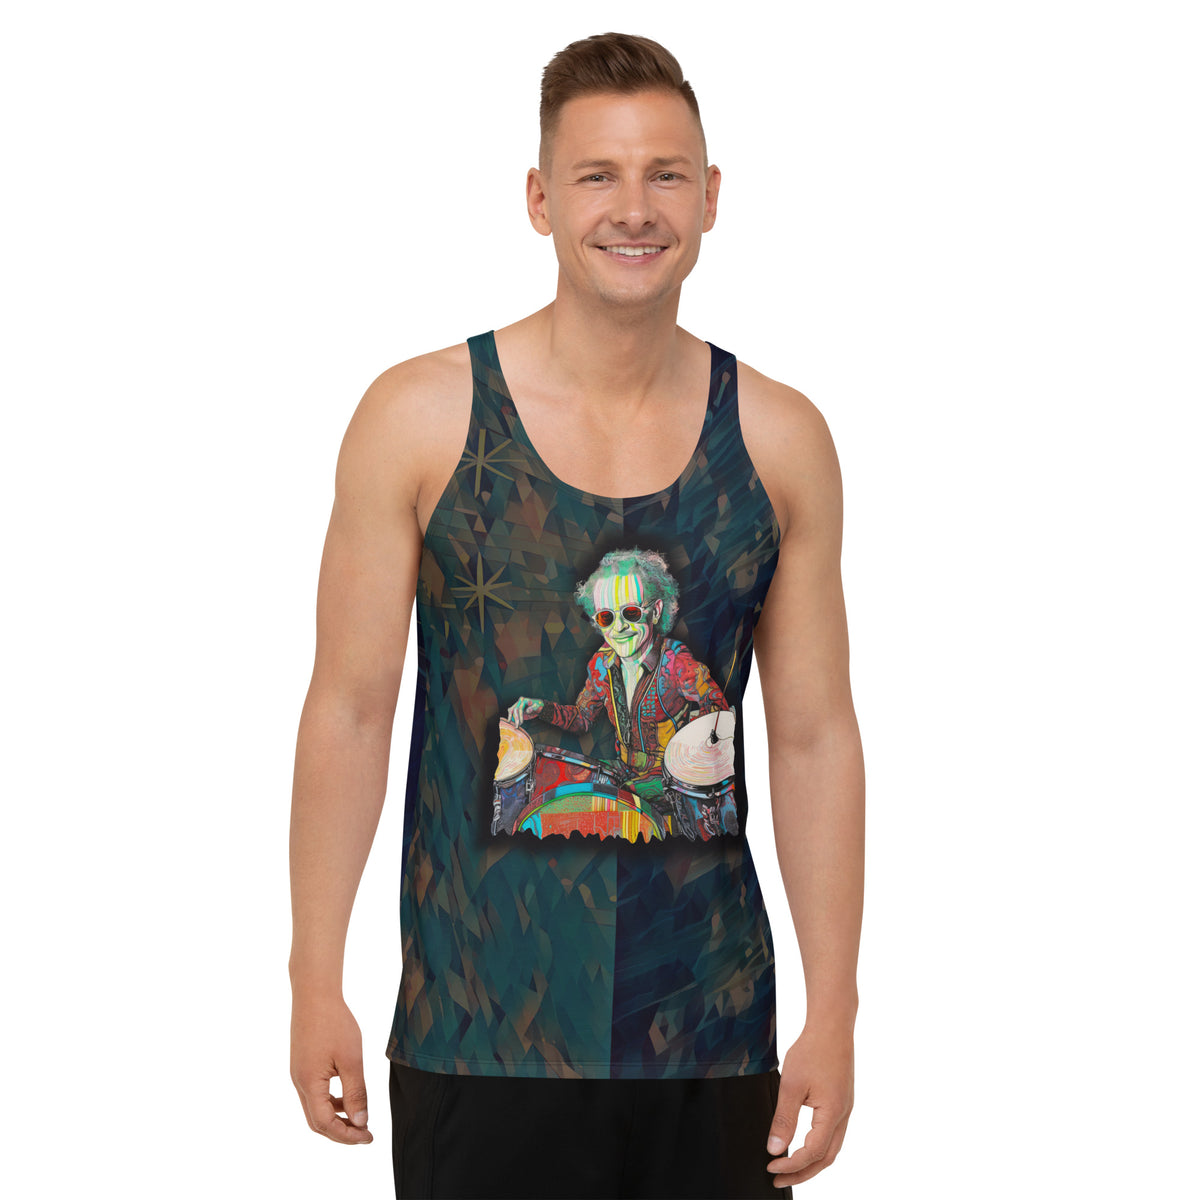 Bohemian Blossoms Men's Tank Top on a clothing mannequin.